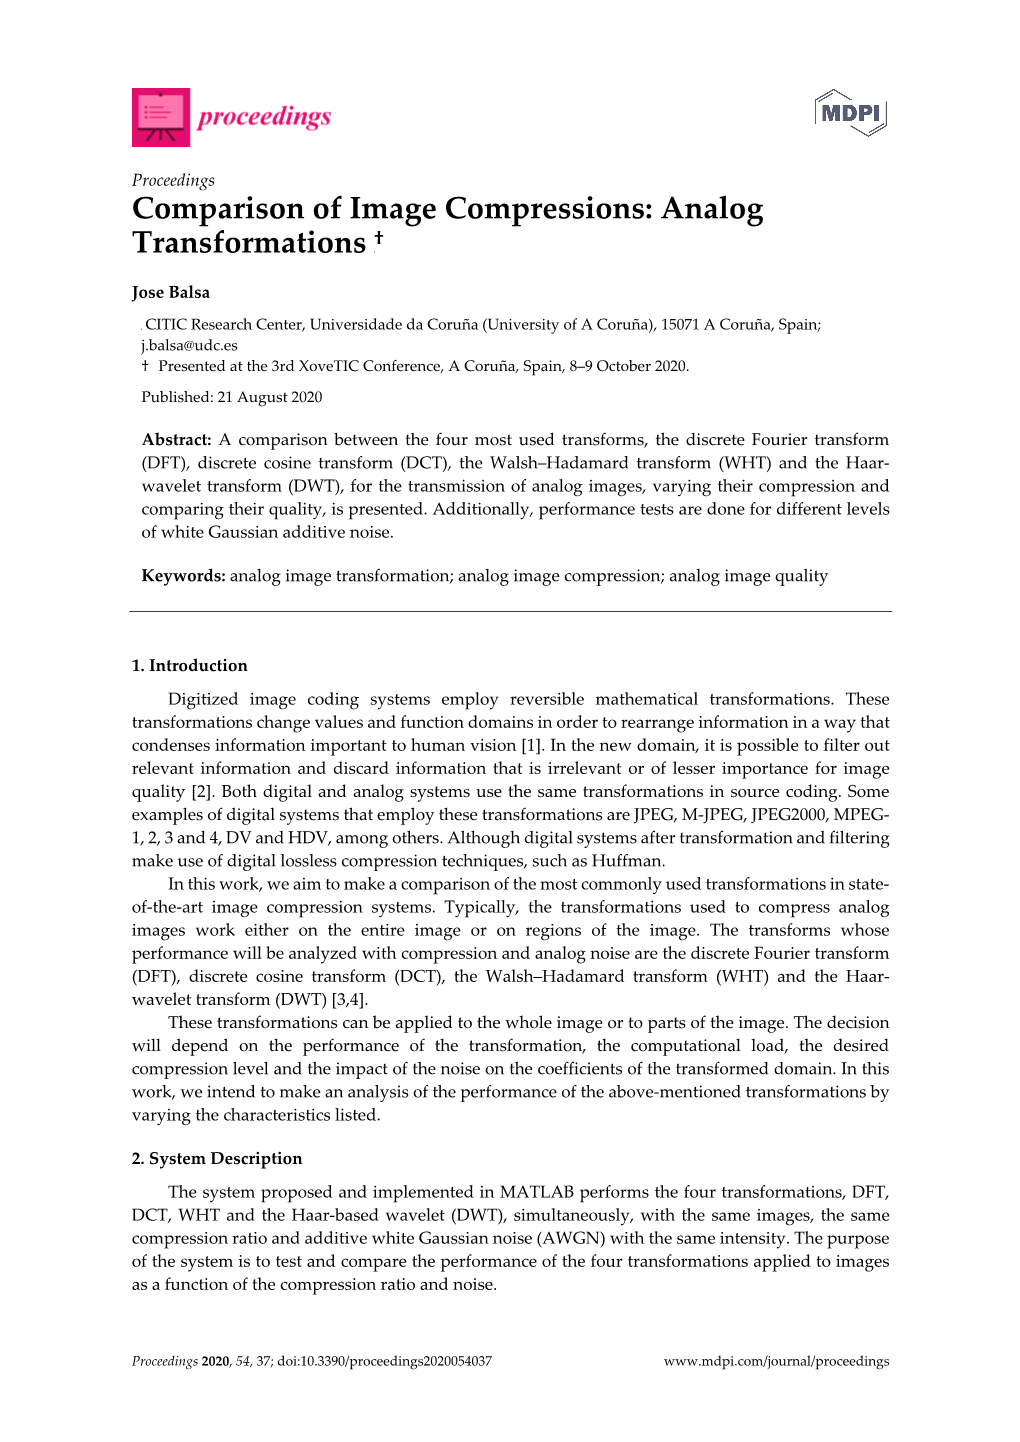 Comparison of Image Compressions: Analog Transformations P